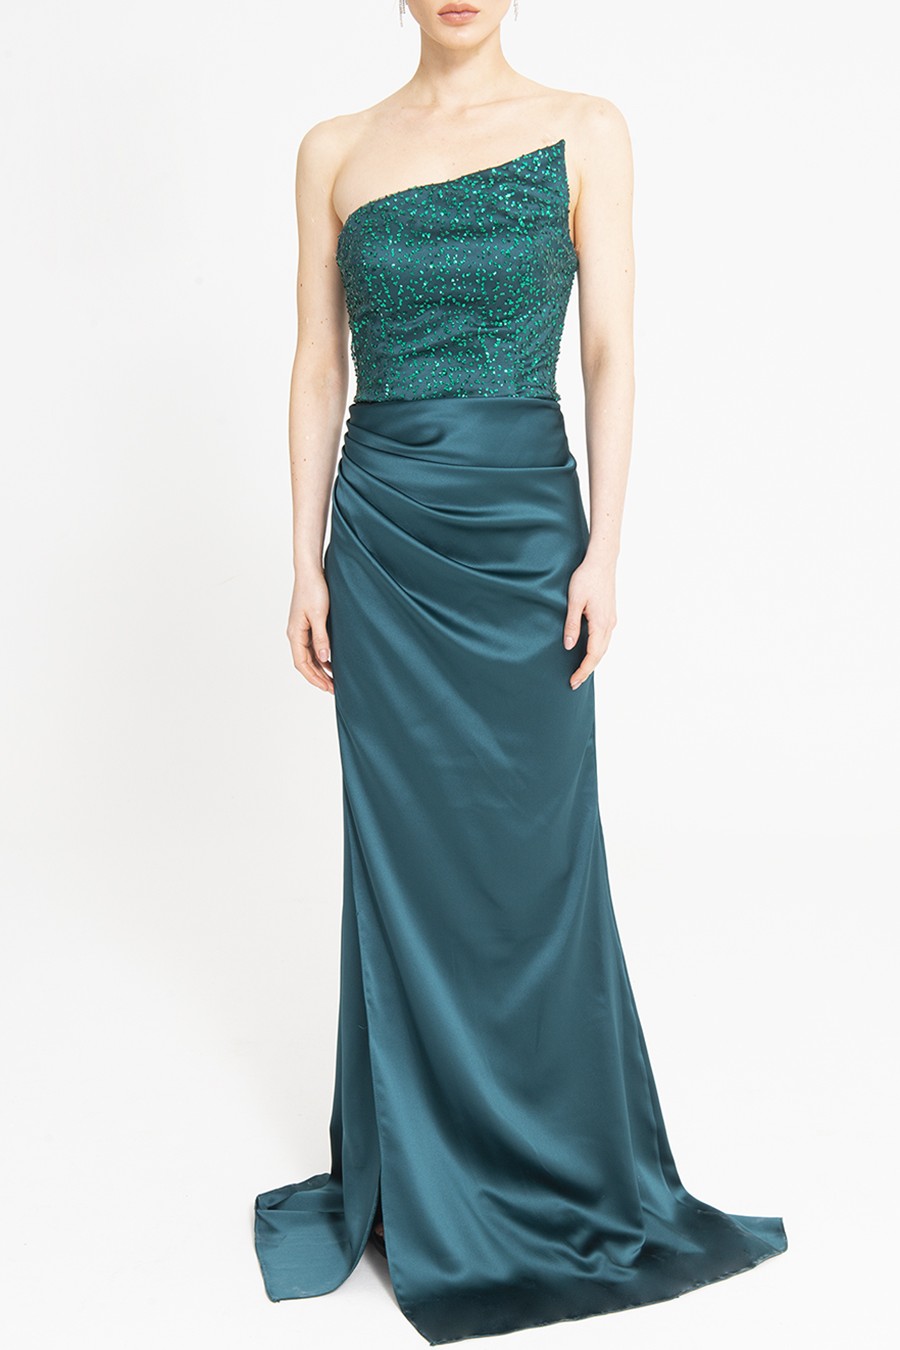 Perry - Mystic Evenings | Evening and Prom Dresses